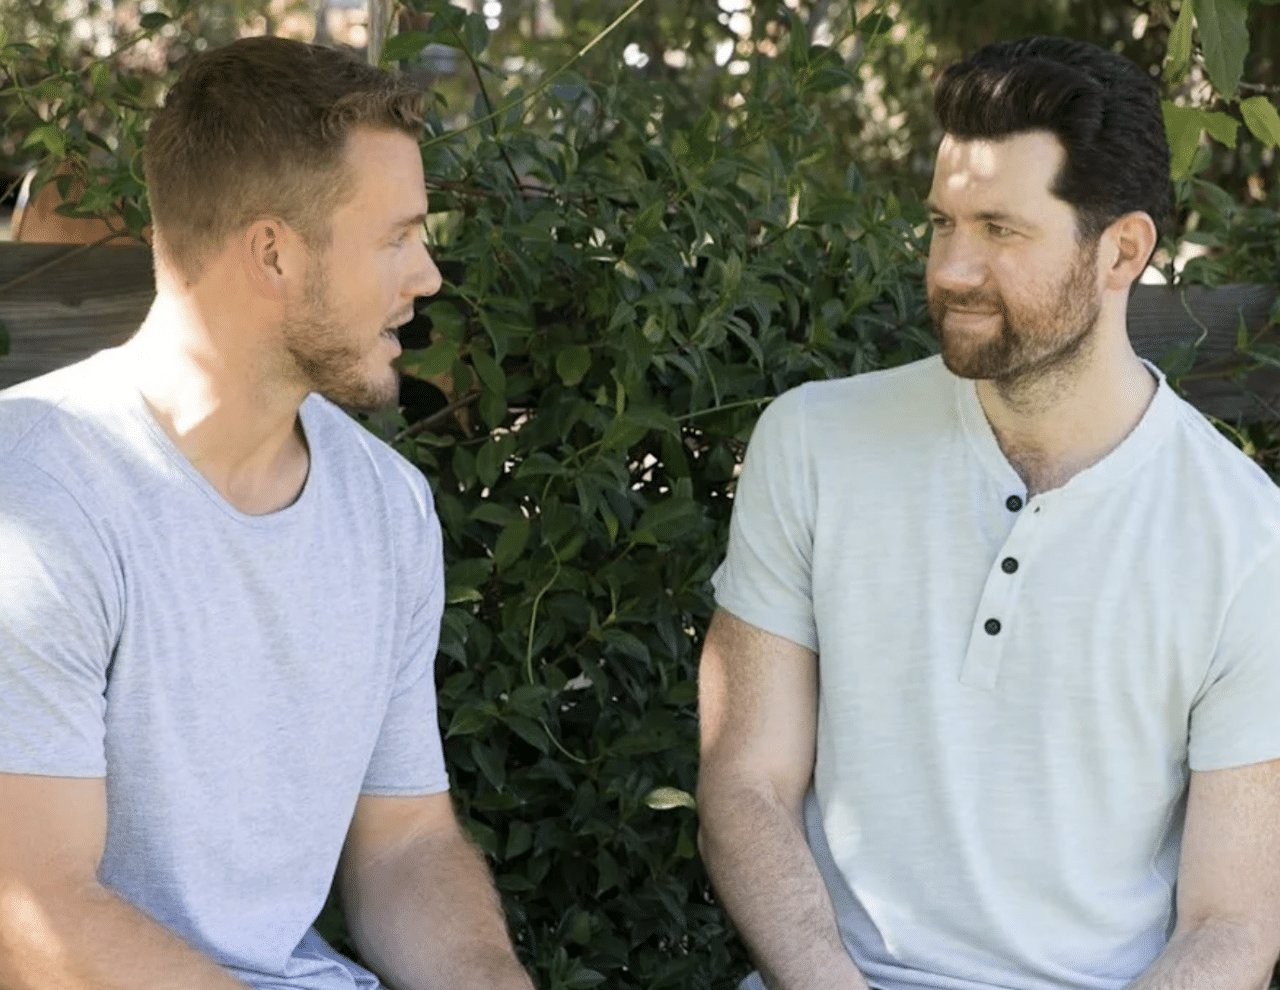 Billy Eichner Predicted that Colton Underwood was ‘the First Gay Bachelor’ 2 Years Ago